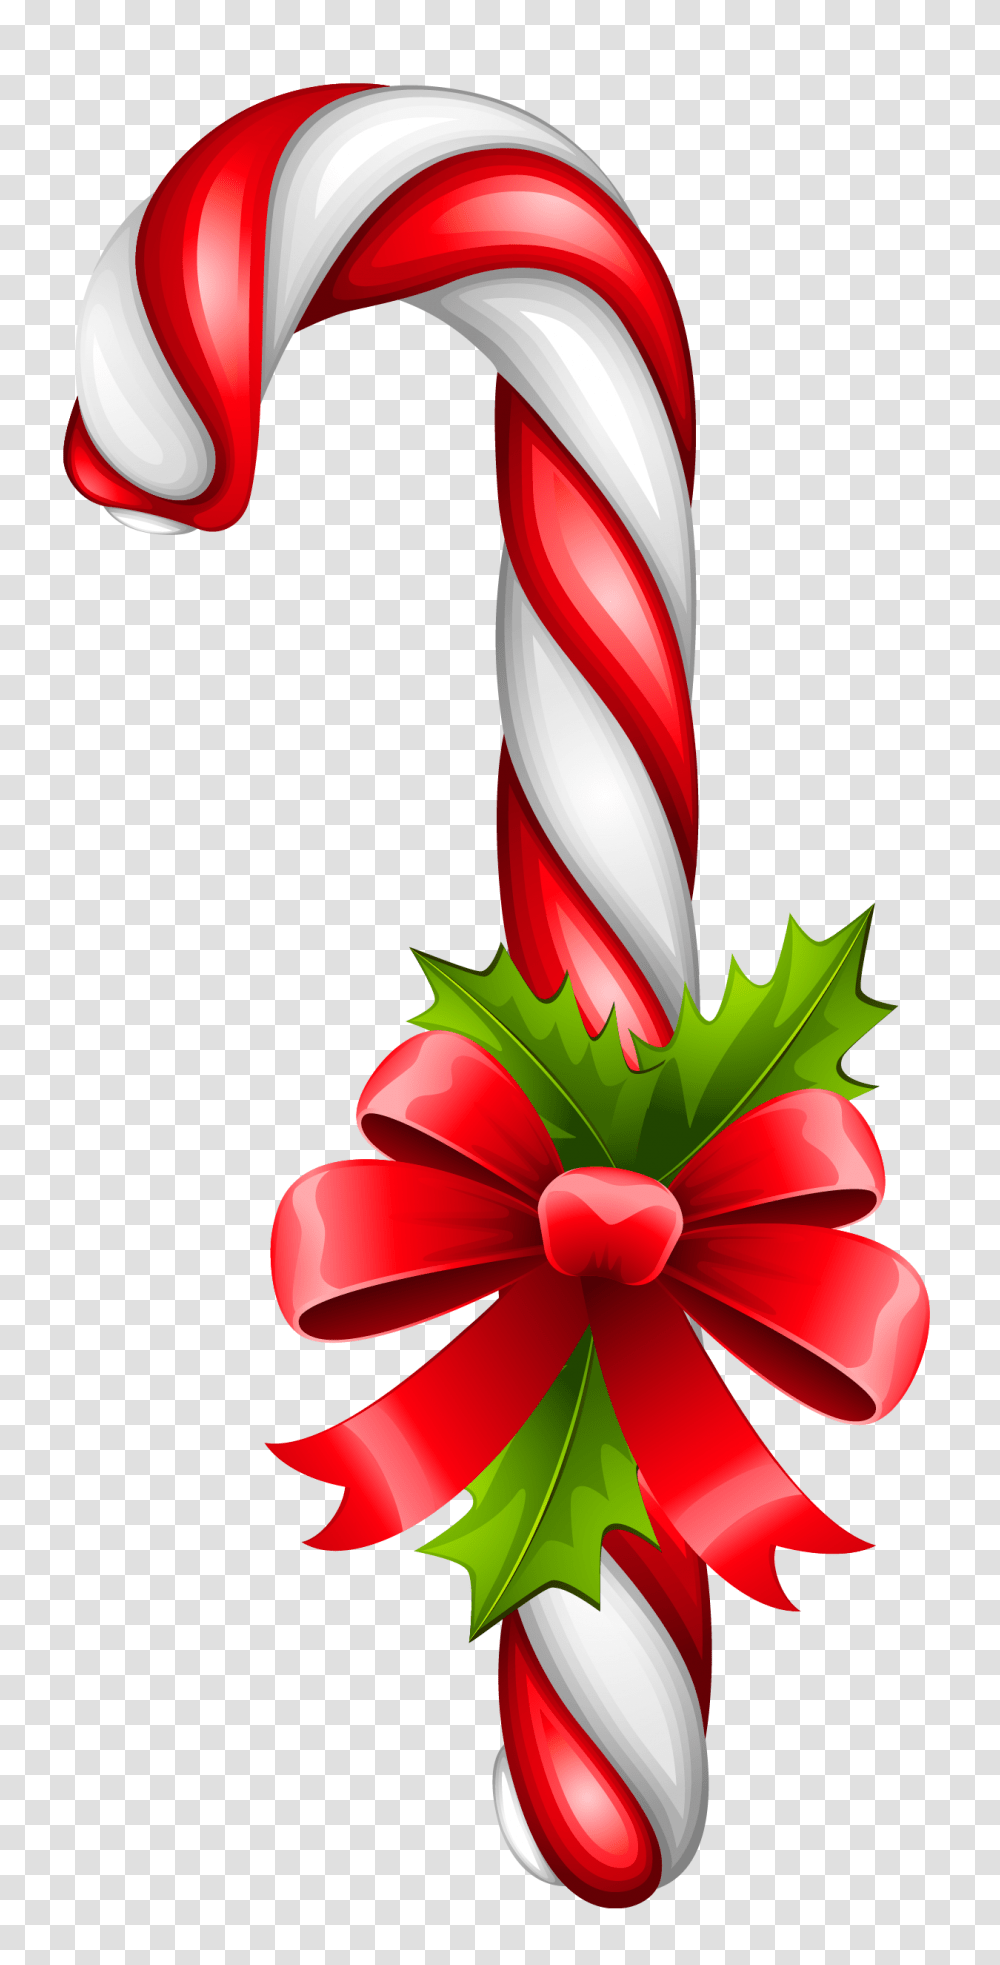 Download Hd Christmas Candy Cane Christmas Candy Cane, Food, Gift, Plant Transparent Png